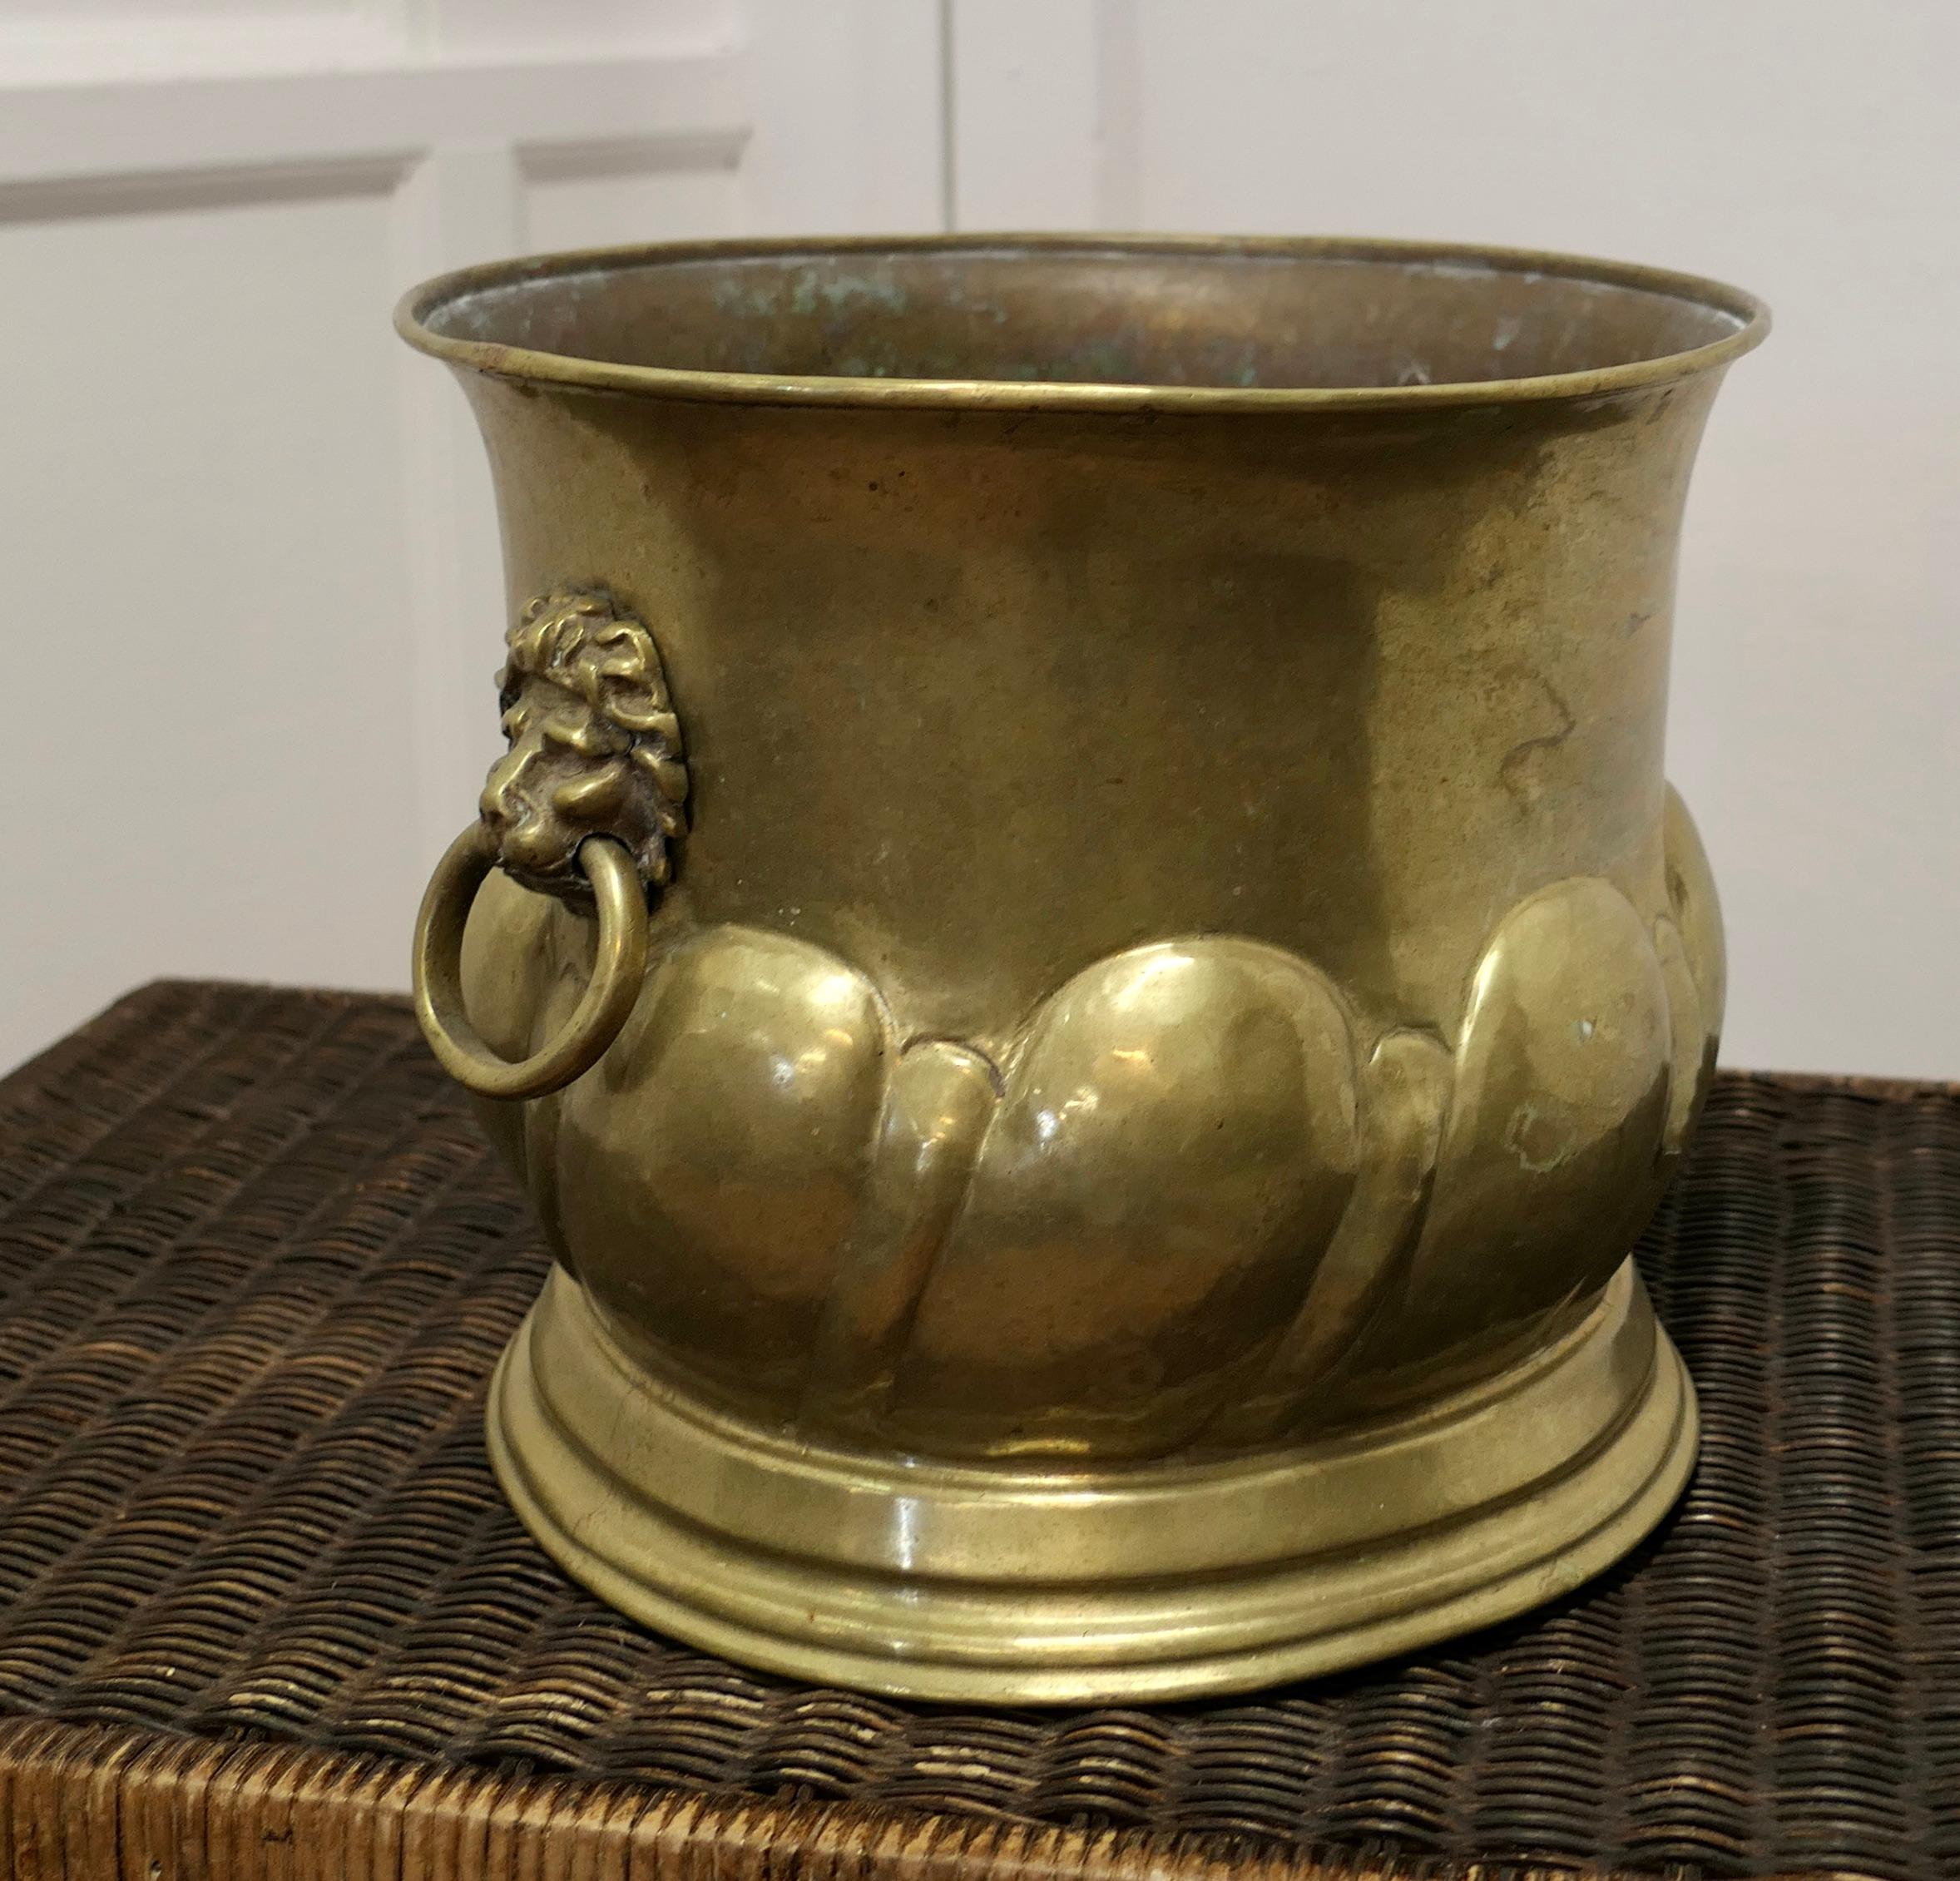 Large Arts and Crafts Brass Jardiniere with Lions Mask Handles

A large piece and a great looker
The pot is round and is made in brass with a beaten decoration and lions mask handles on each side
In good condition and large, the pot is 11” high